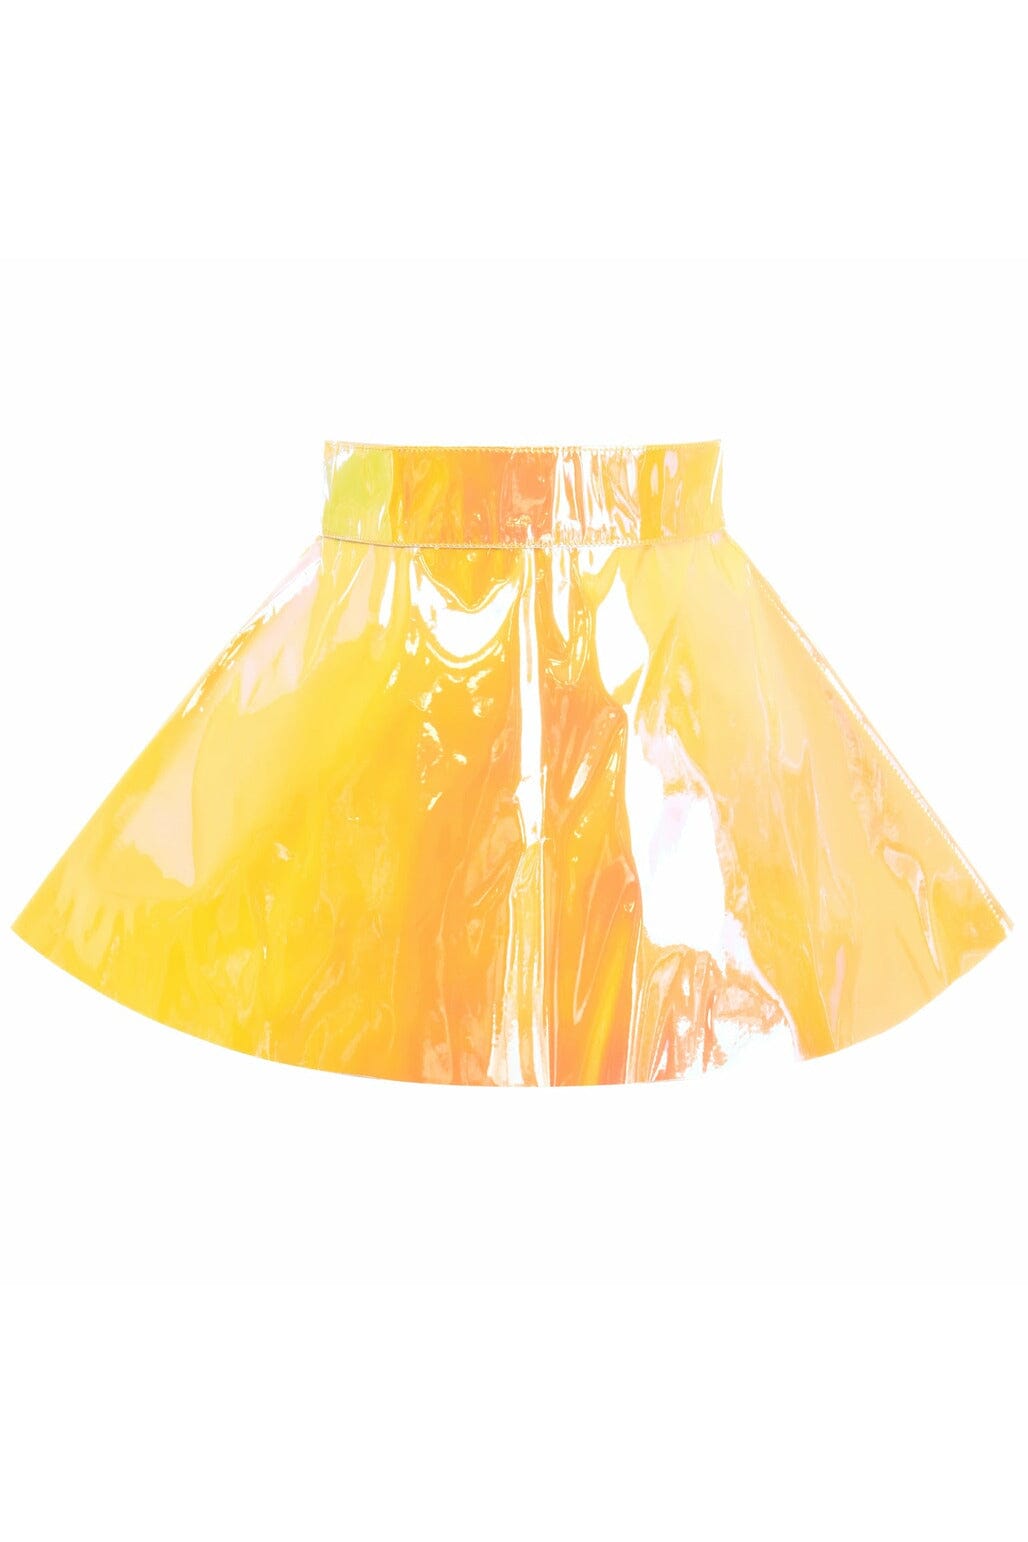 Yellow Vinyl Skater Skirt-Mini Skirts-Daisy Corsets-Pink-S-SEXYSHOES.COM